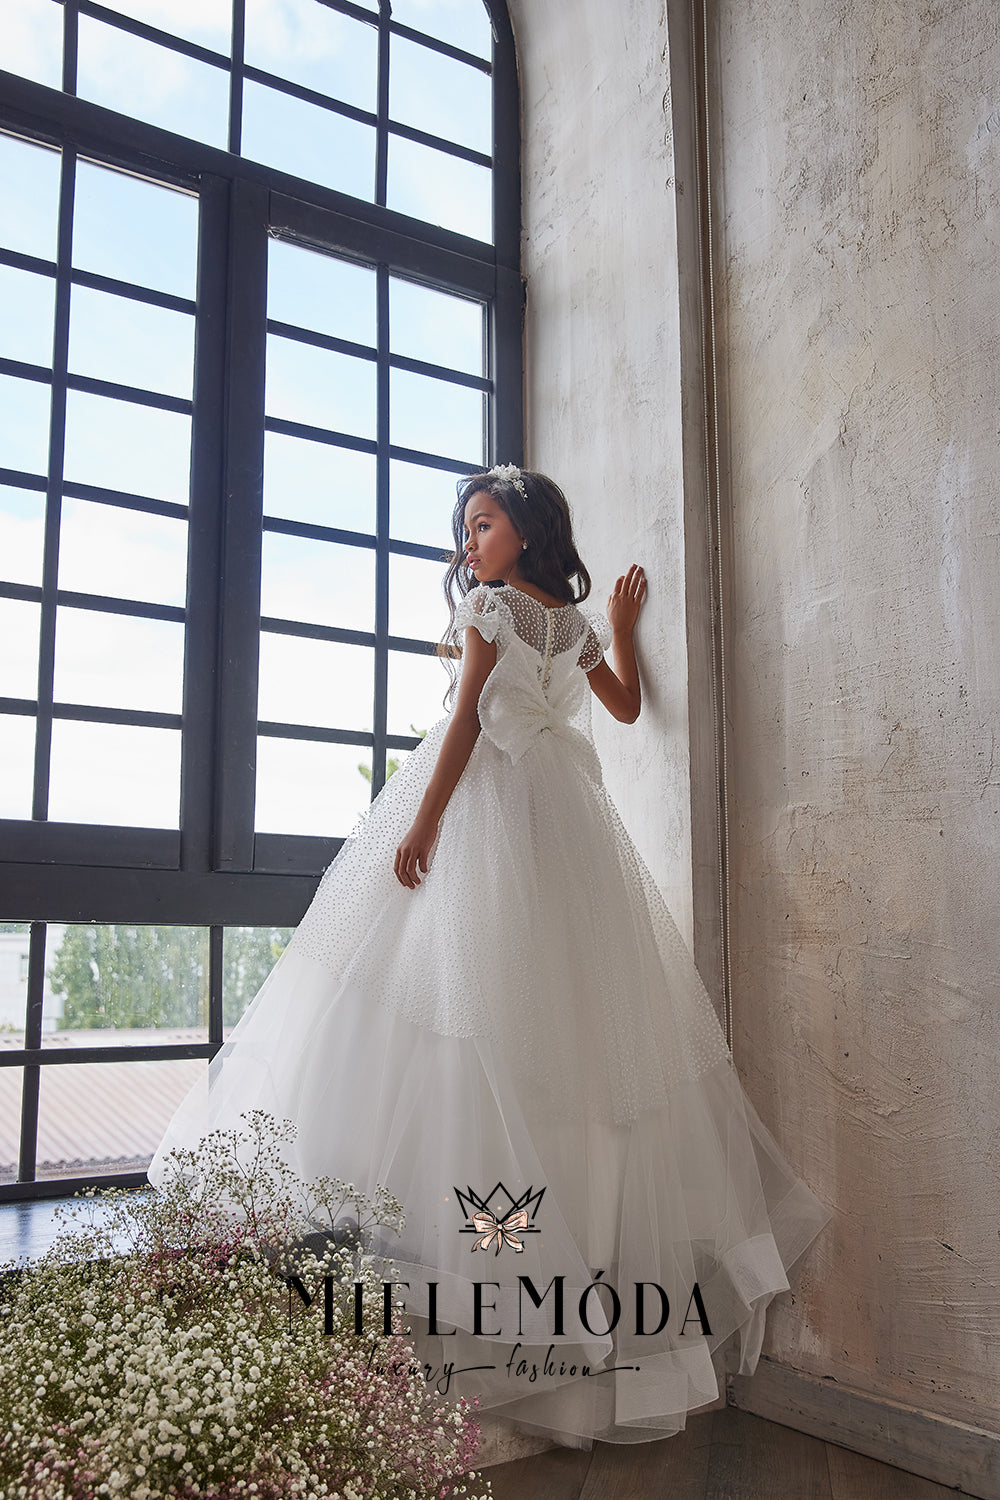 Emmerling - Emmerling Communion Dresses 2022 plus sizes Pure White Couture  Collection Accessories bolero jacket headdress